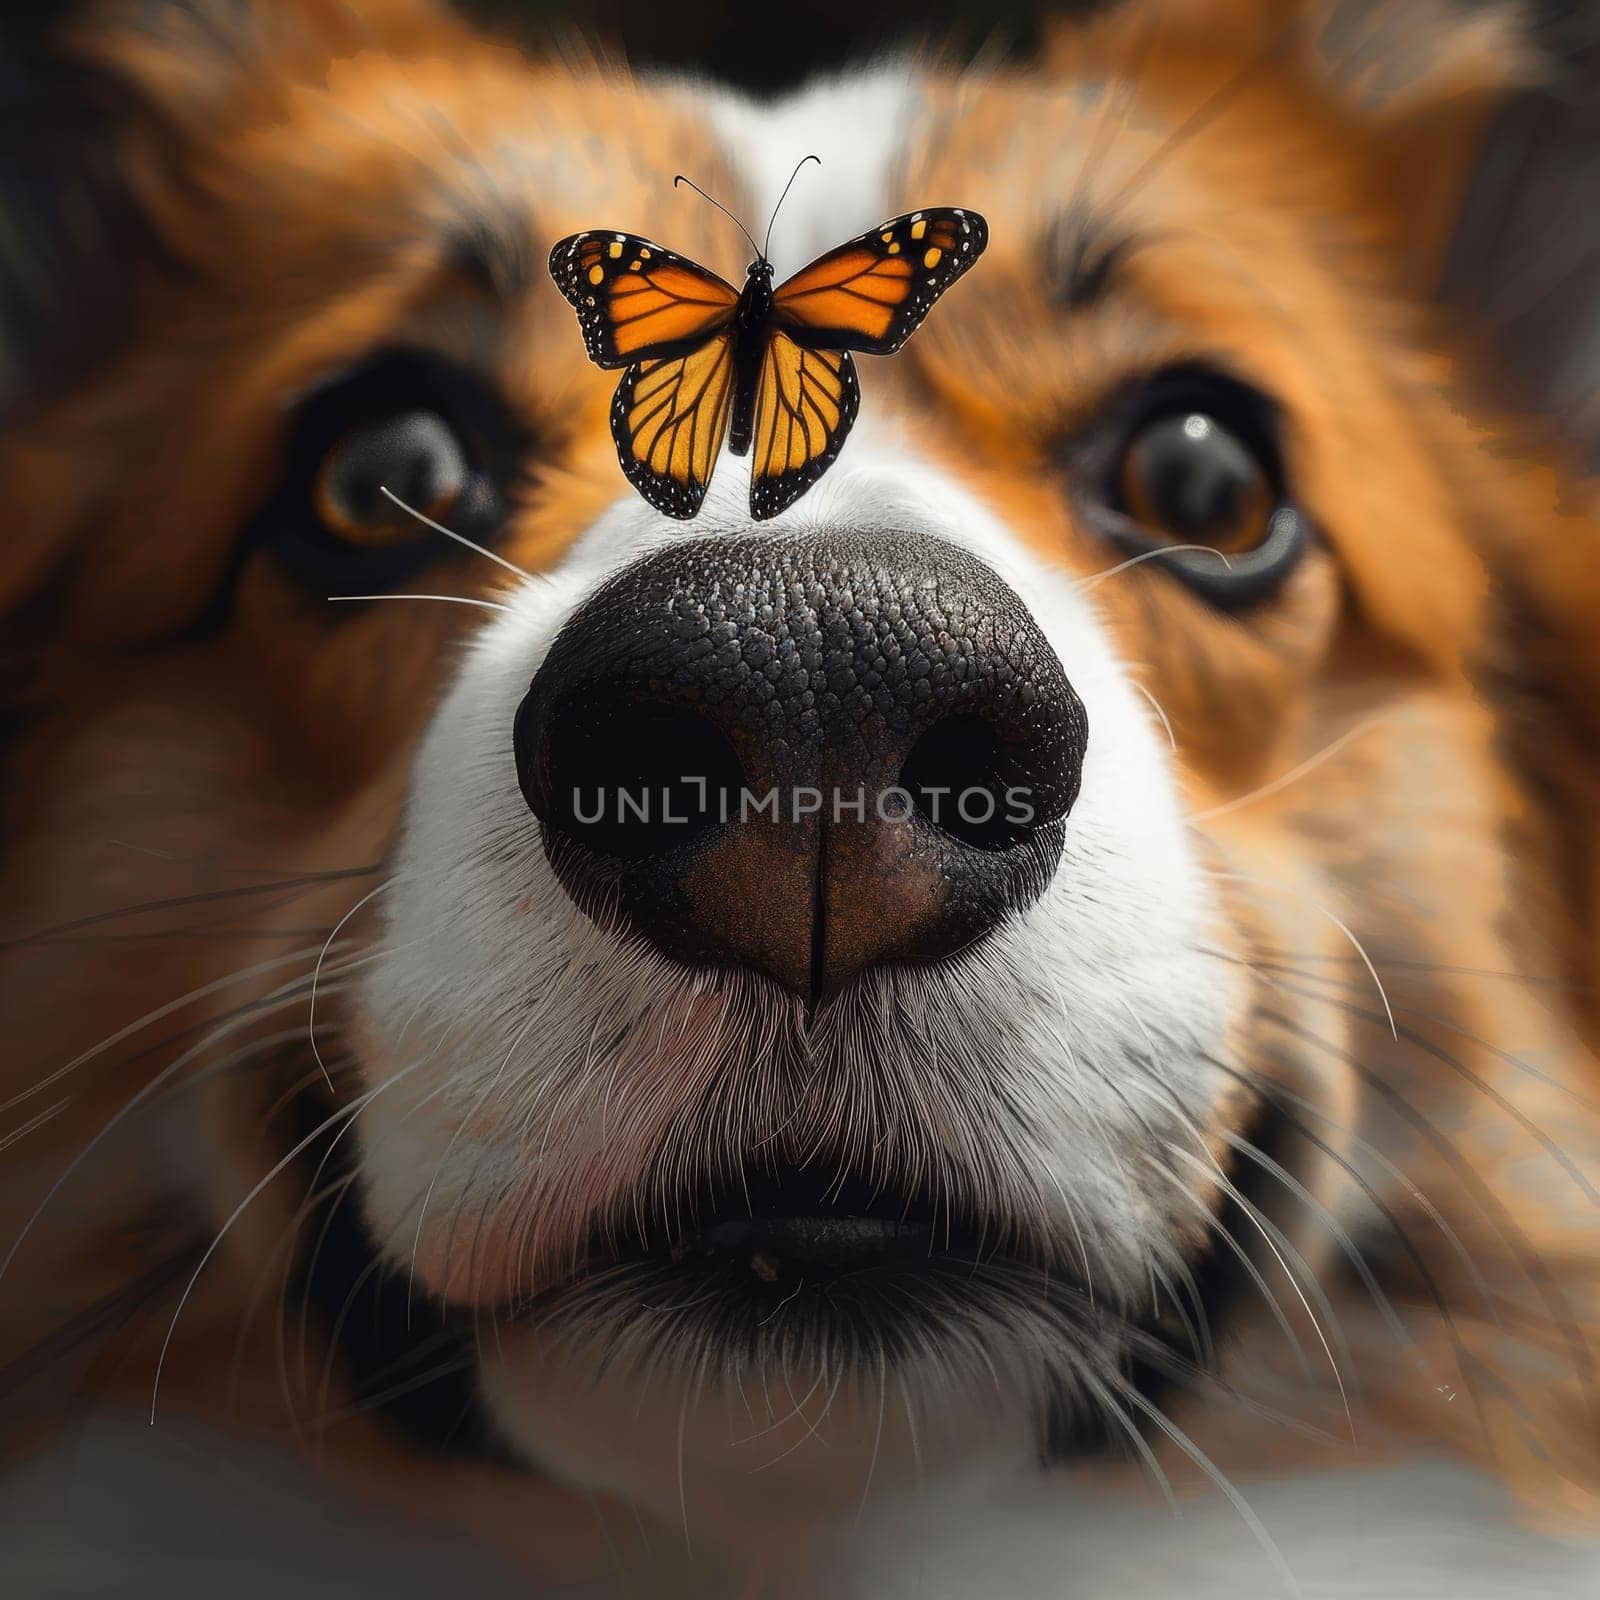 A painted lady butterfly sits gently on a corgi dog's snout, its intricate wings contrasting with the dog's soft fur. Both subjects are in sharp focus against a soft background.